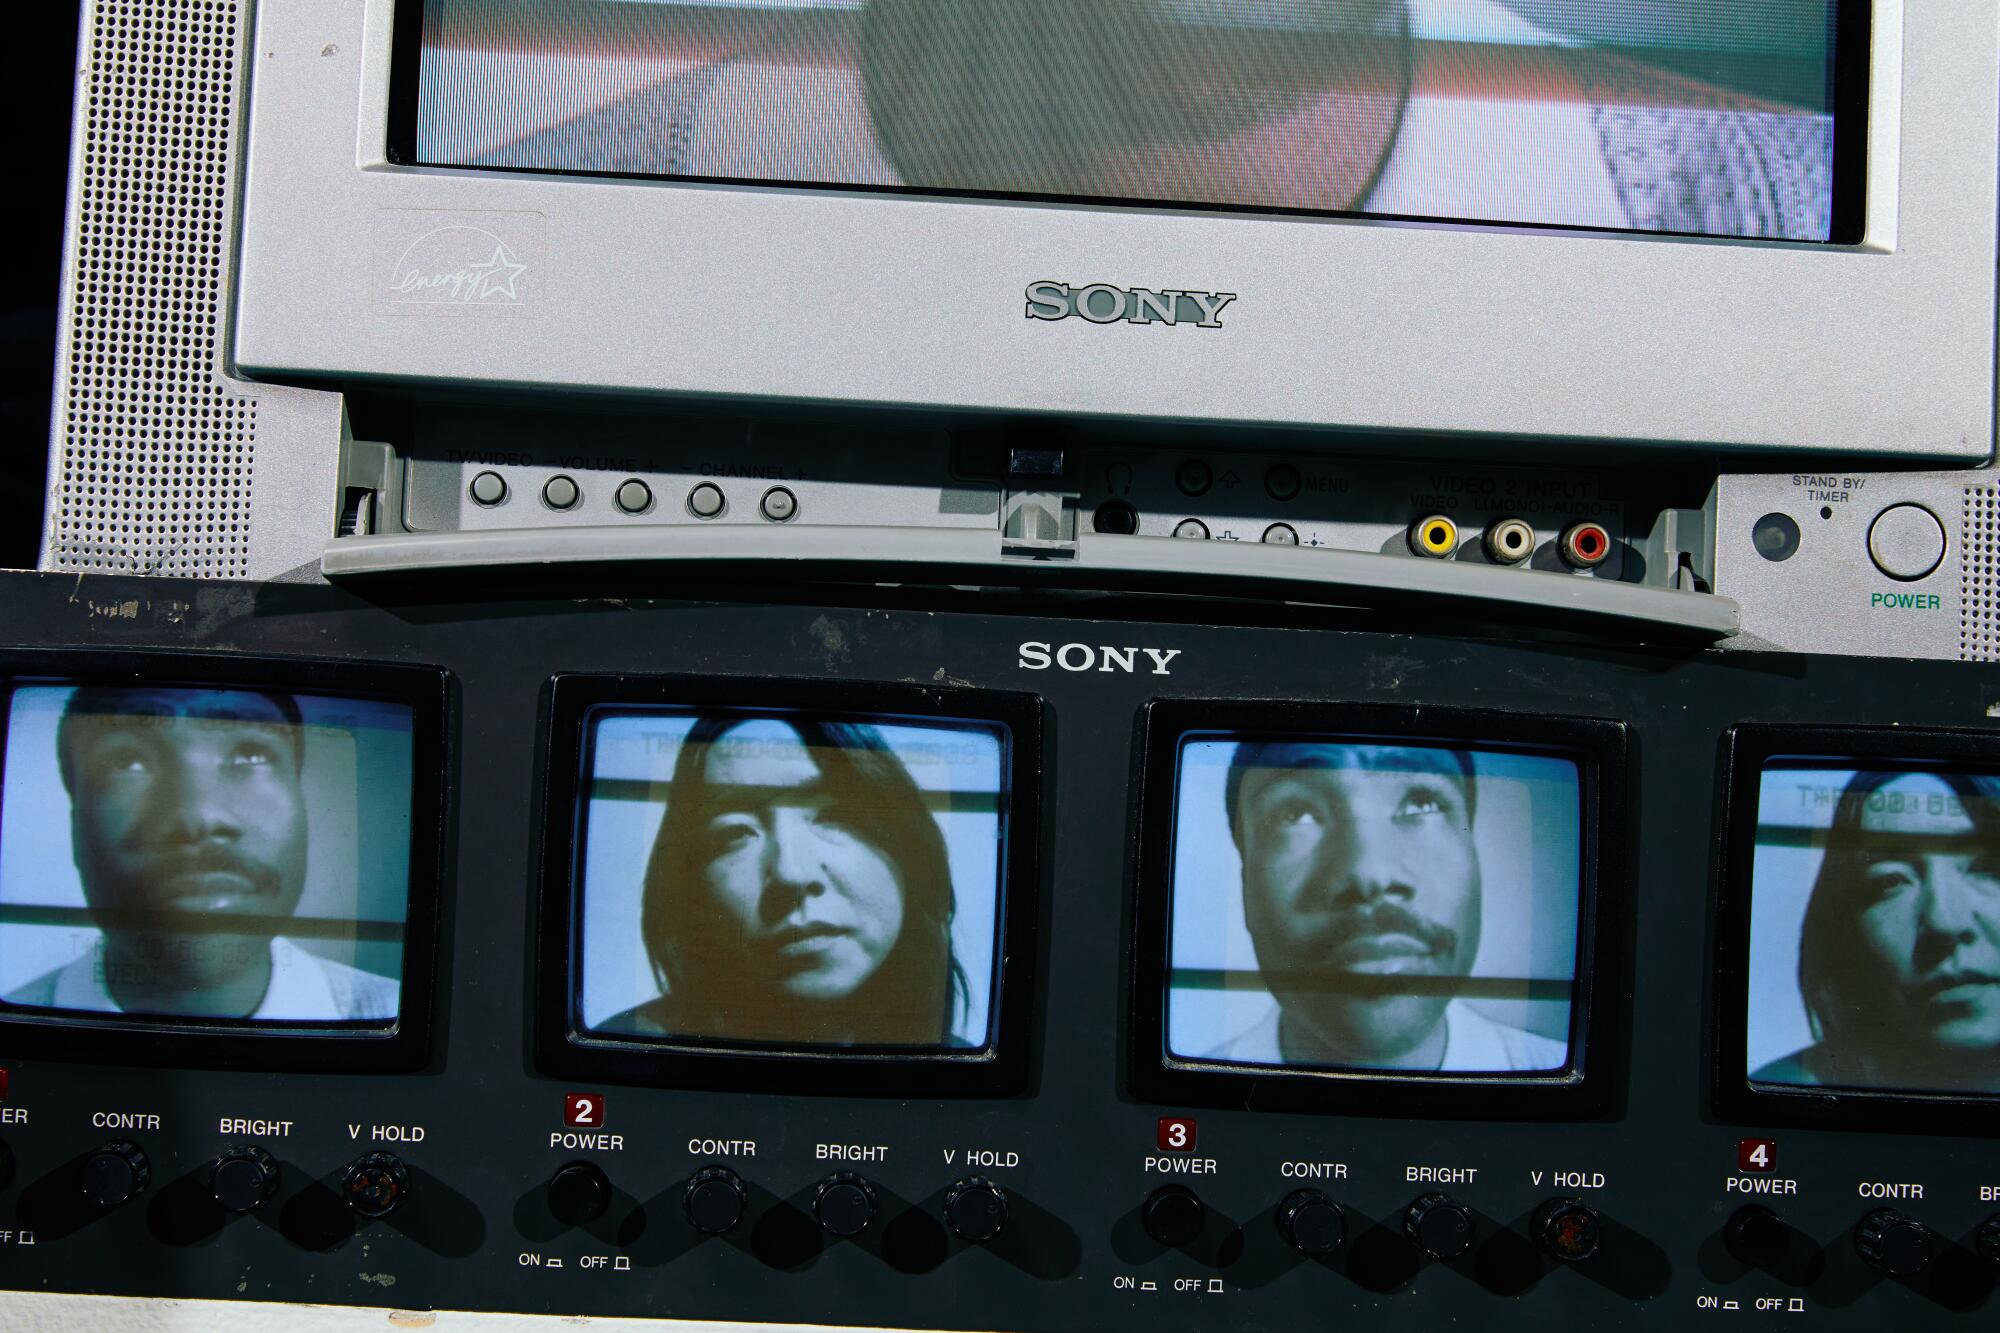 TV screens with alternating images of a man and a woman.